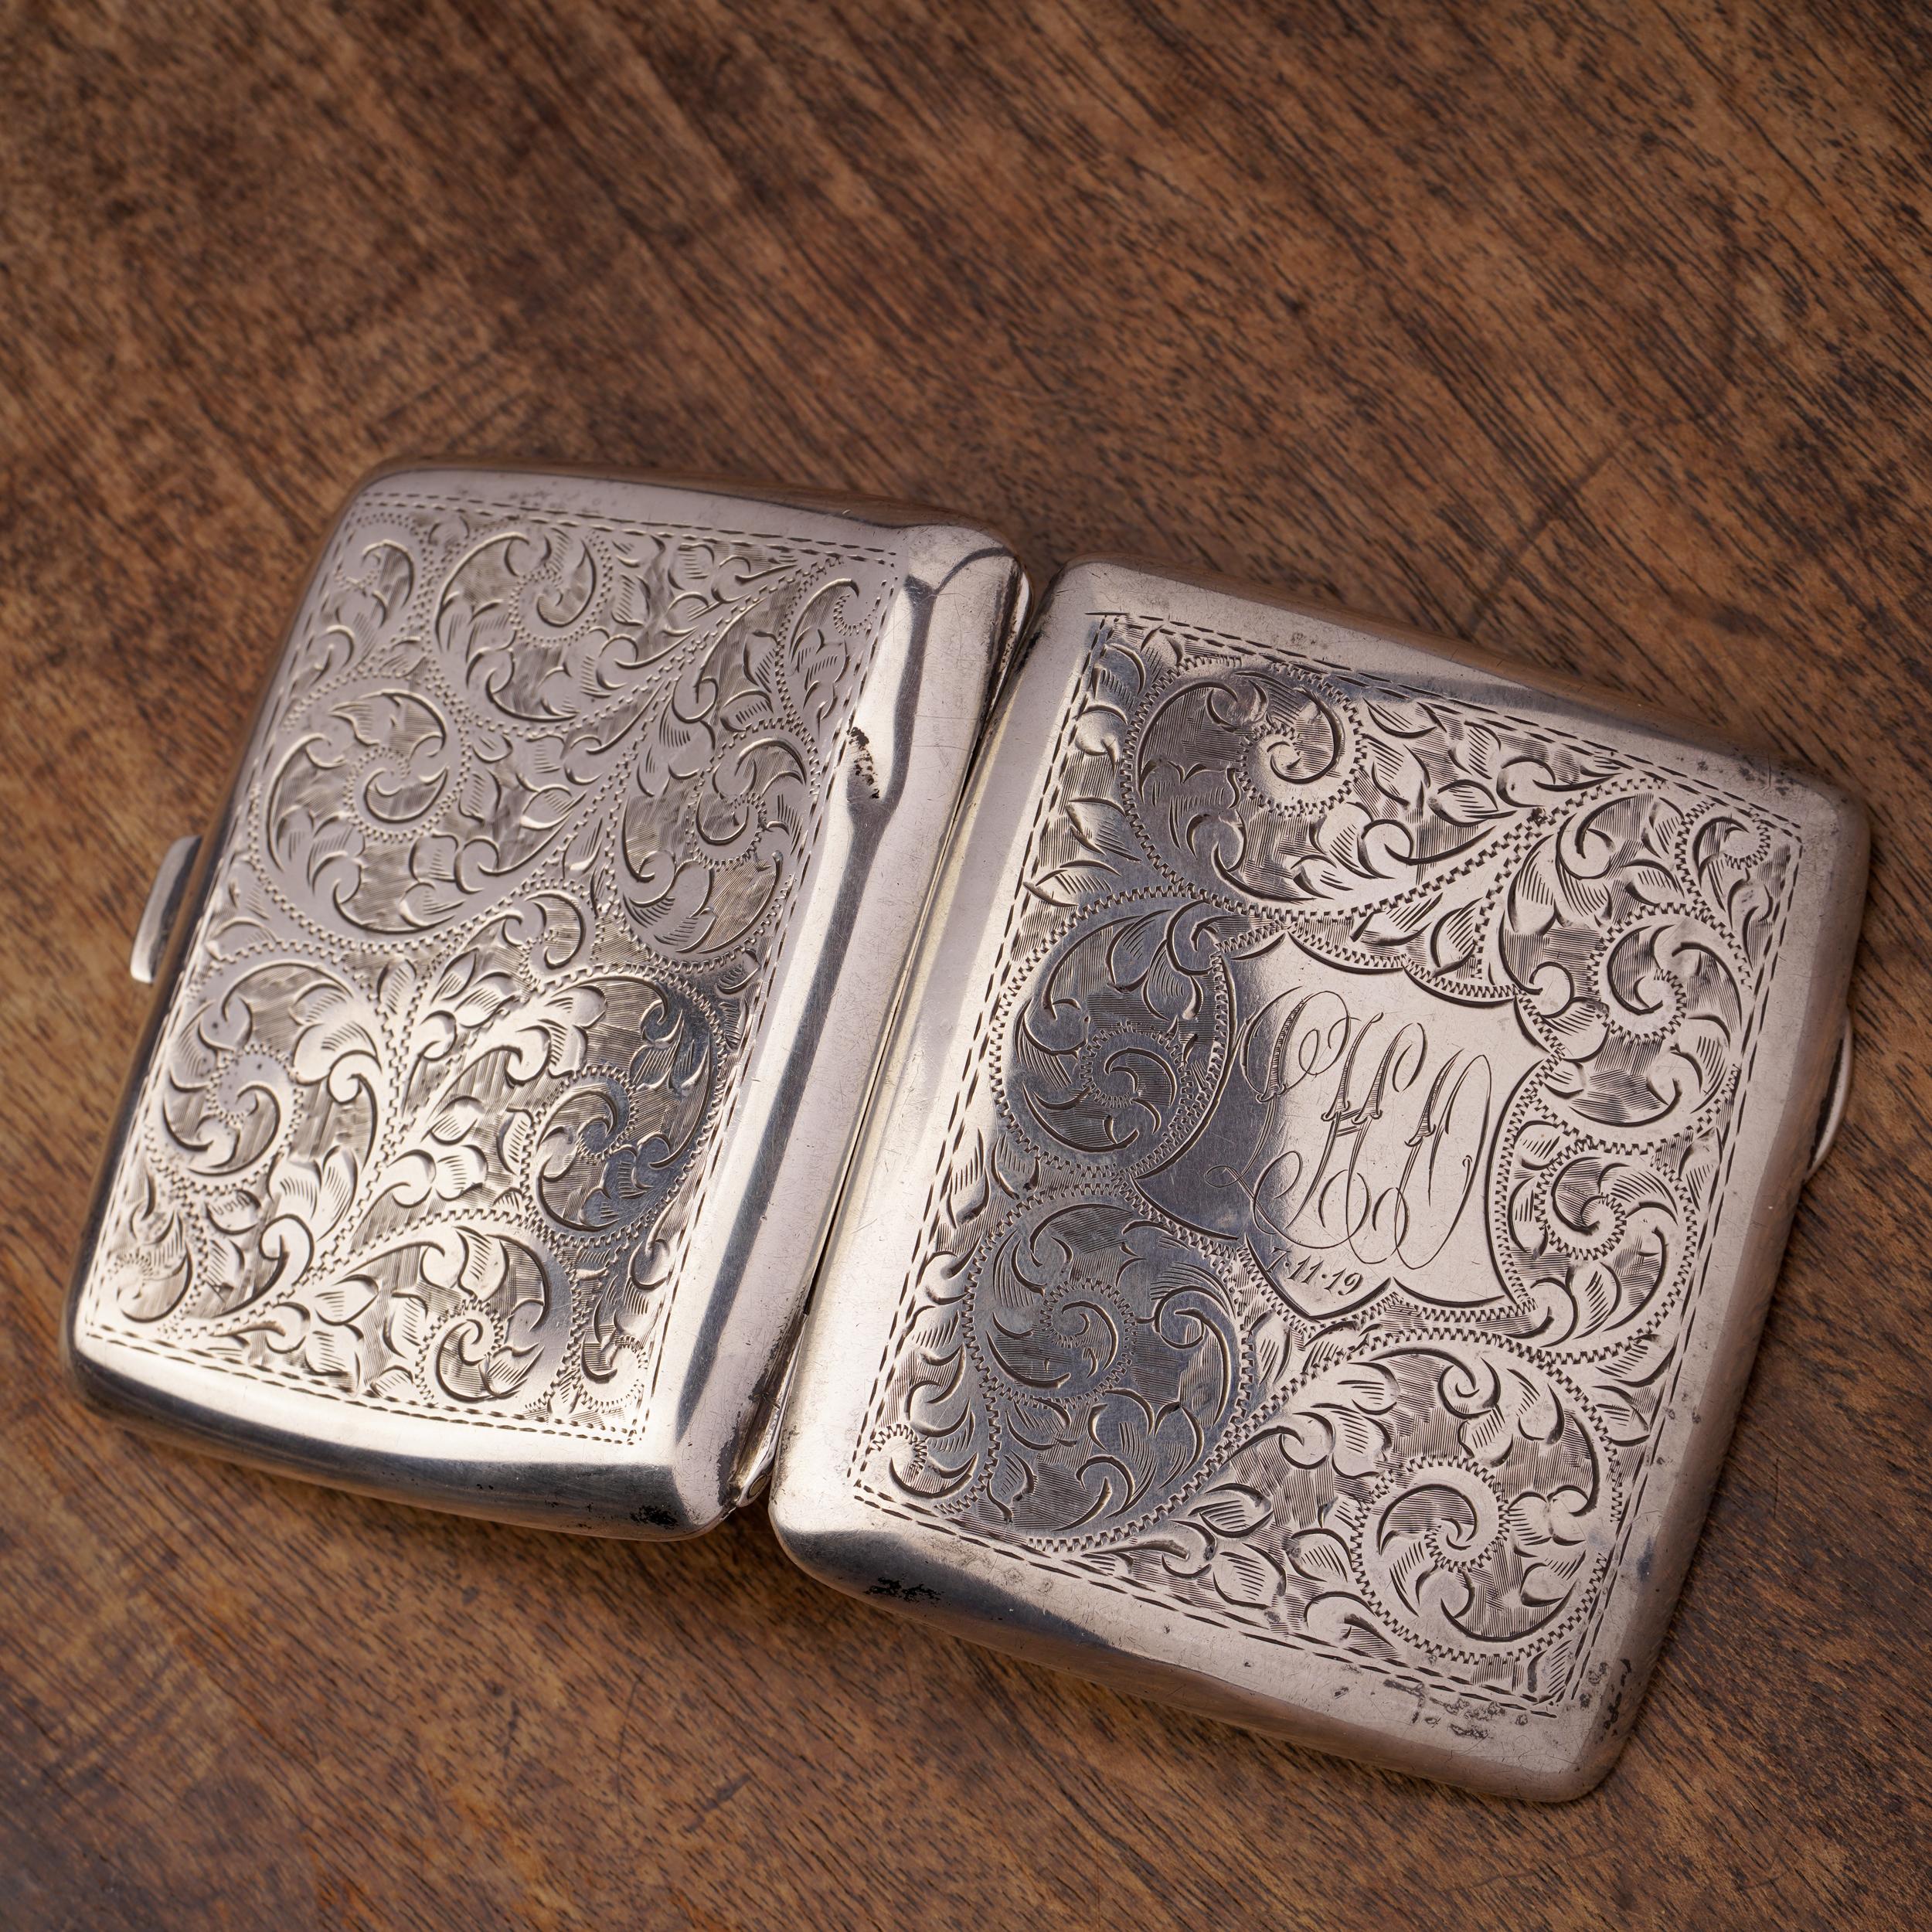 Antique Highly Ornate Sterling Silver Cigarette Case - Monogram 'LHO In Good Condition For Sale In Braintree, GB